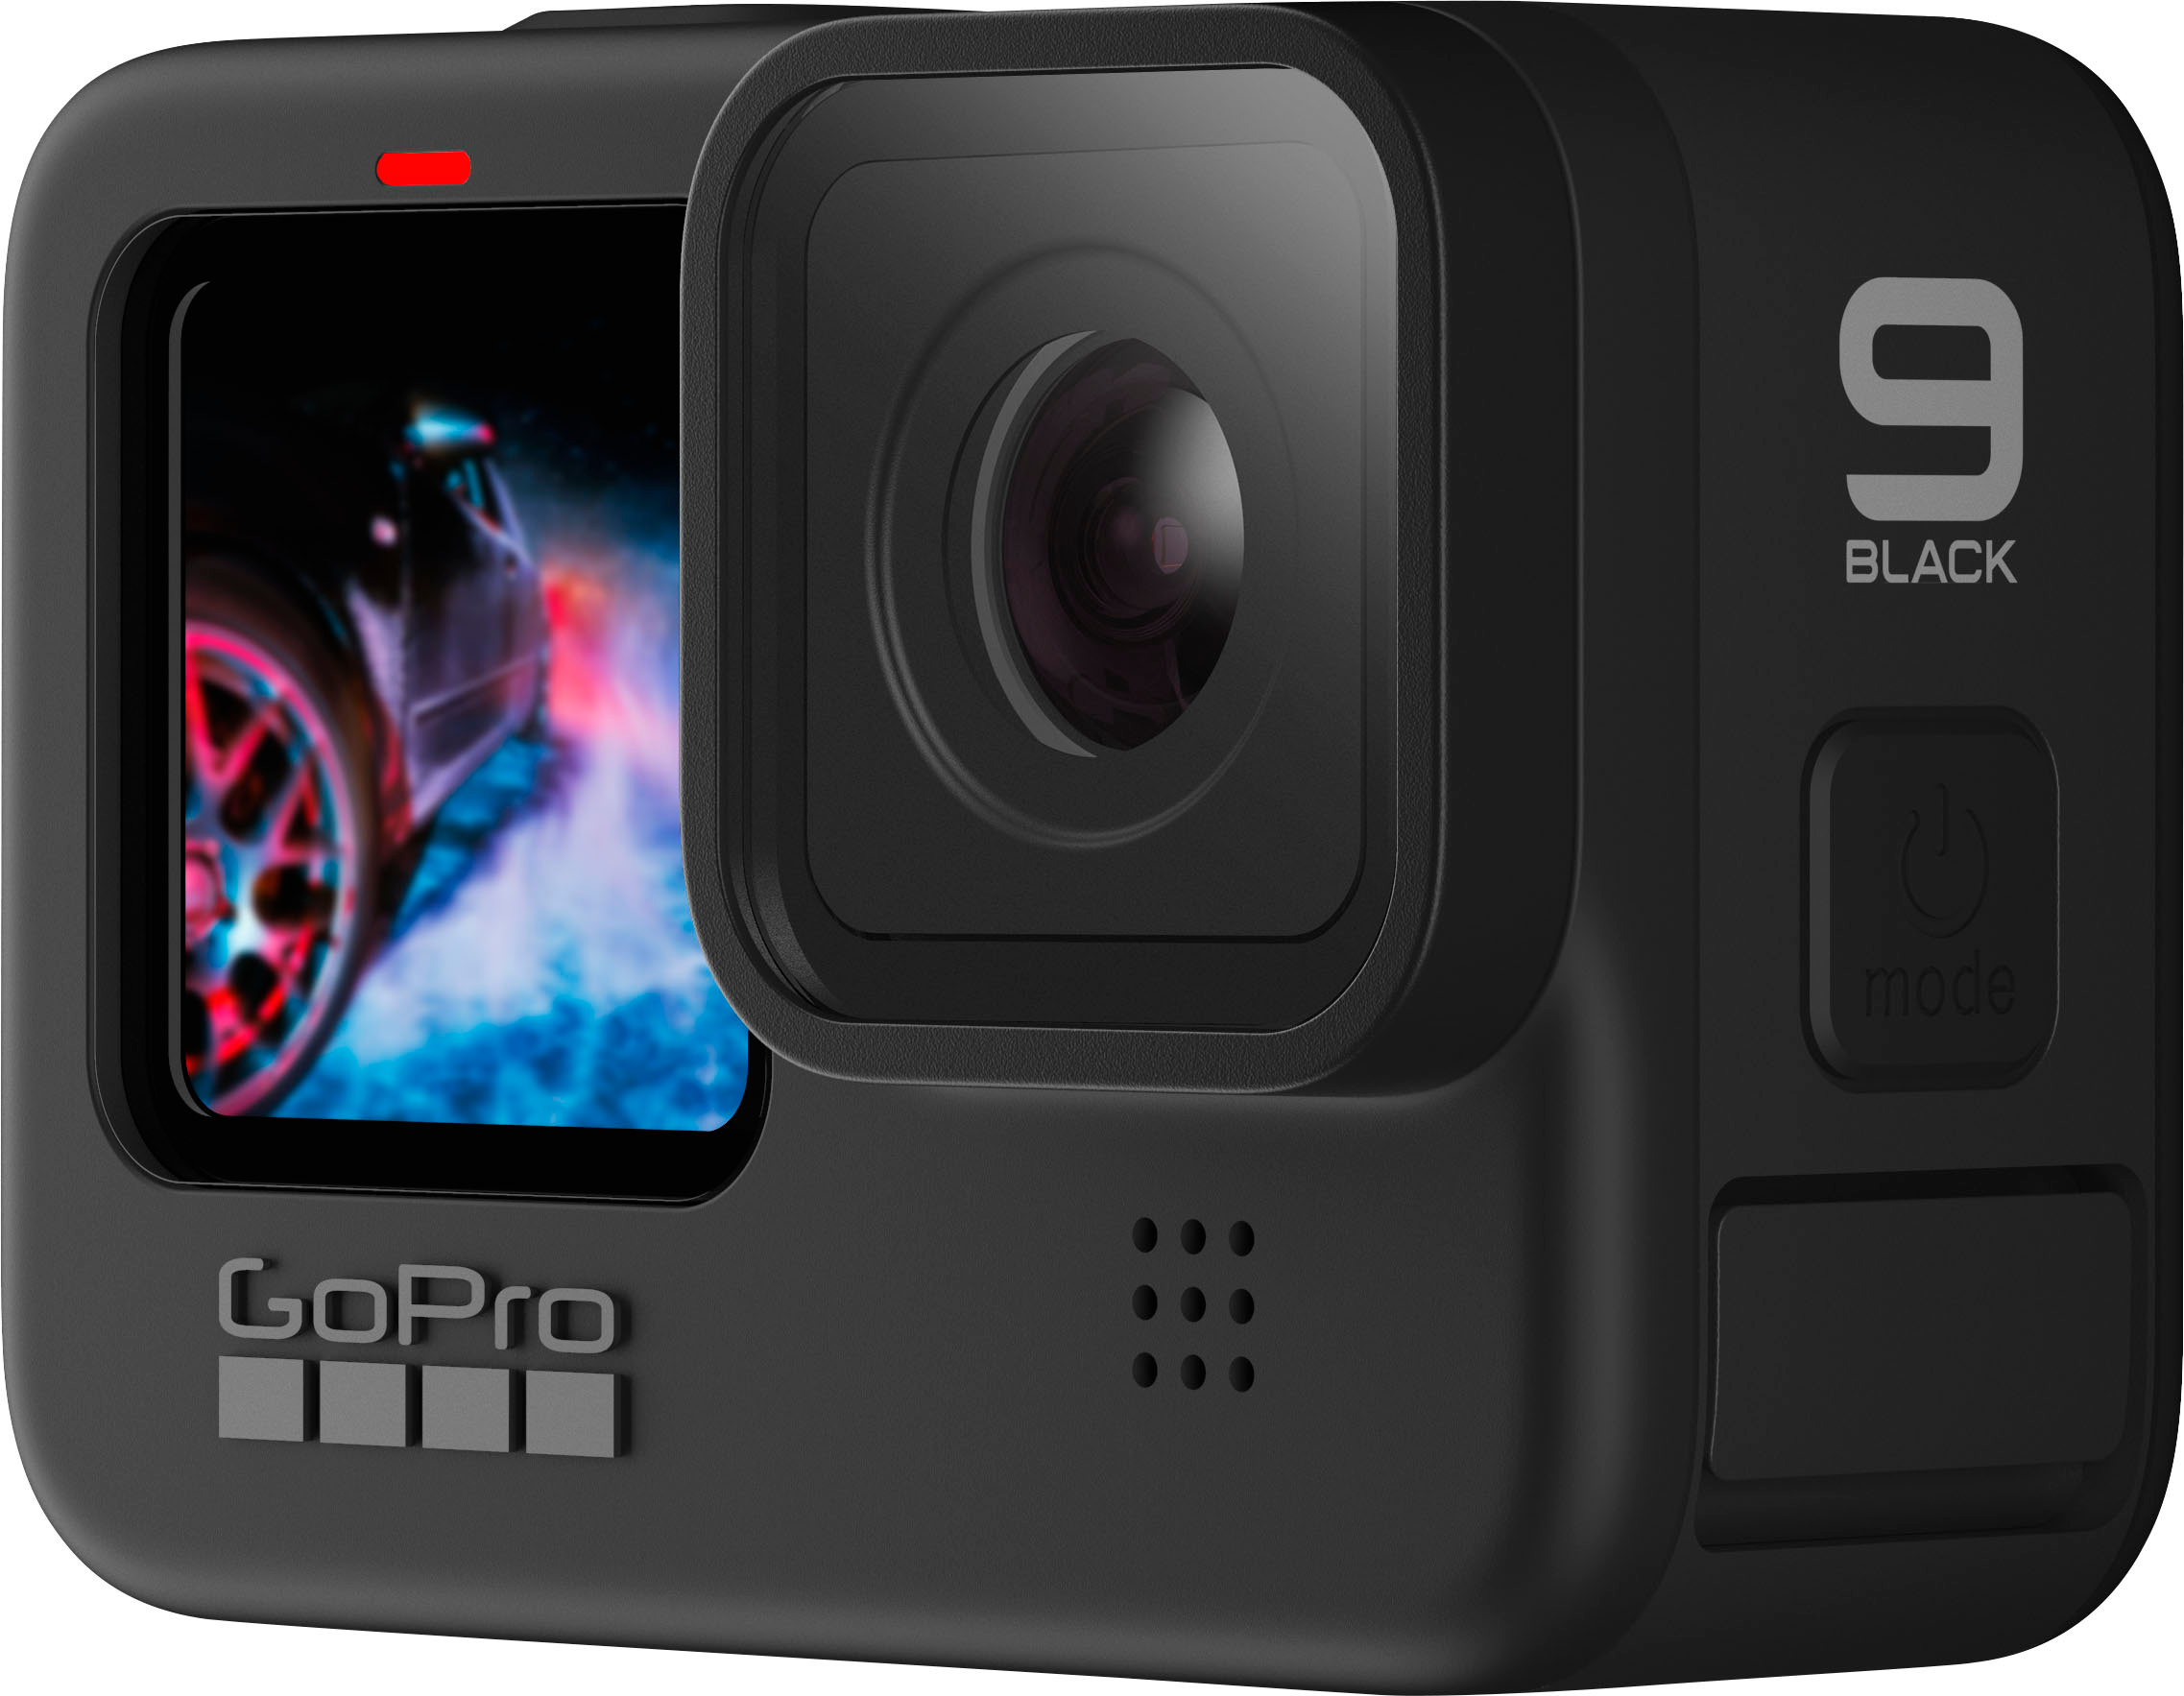 GoPro HERO9 Black and 20 MP Streaming Action Camera Black - Best Buy